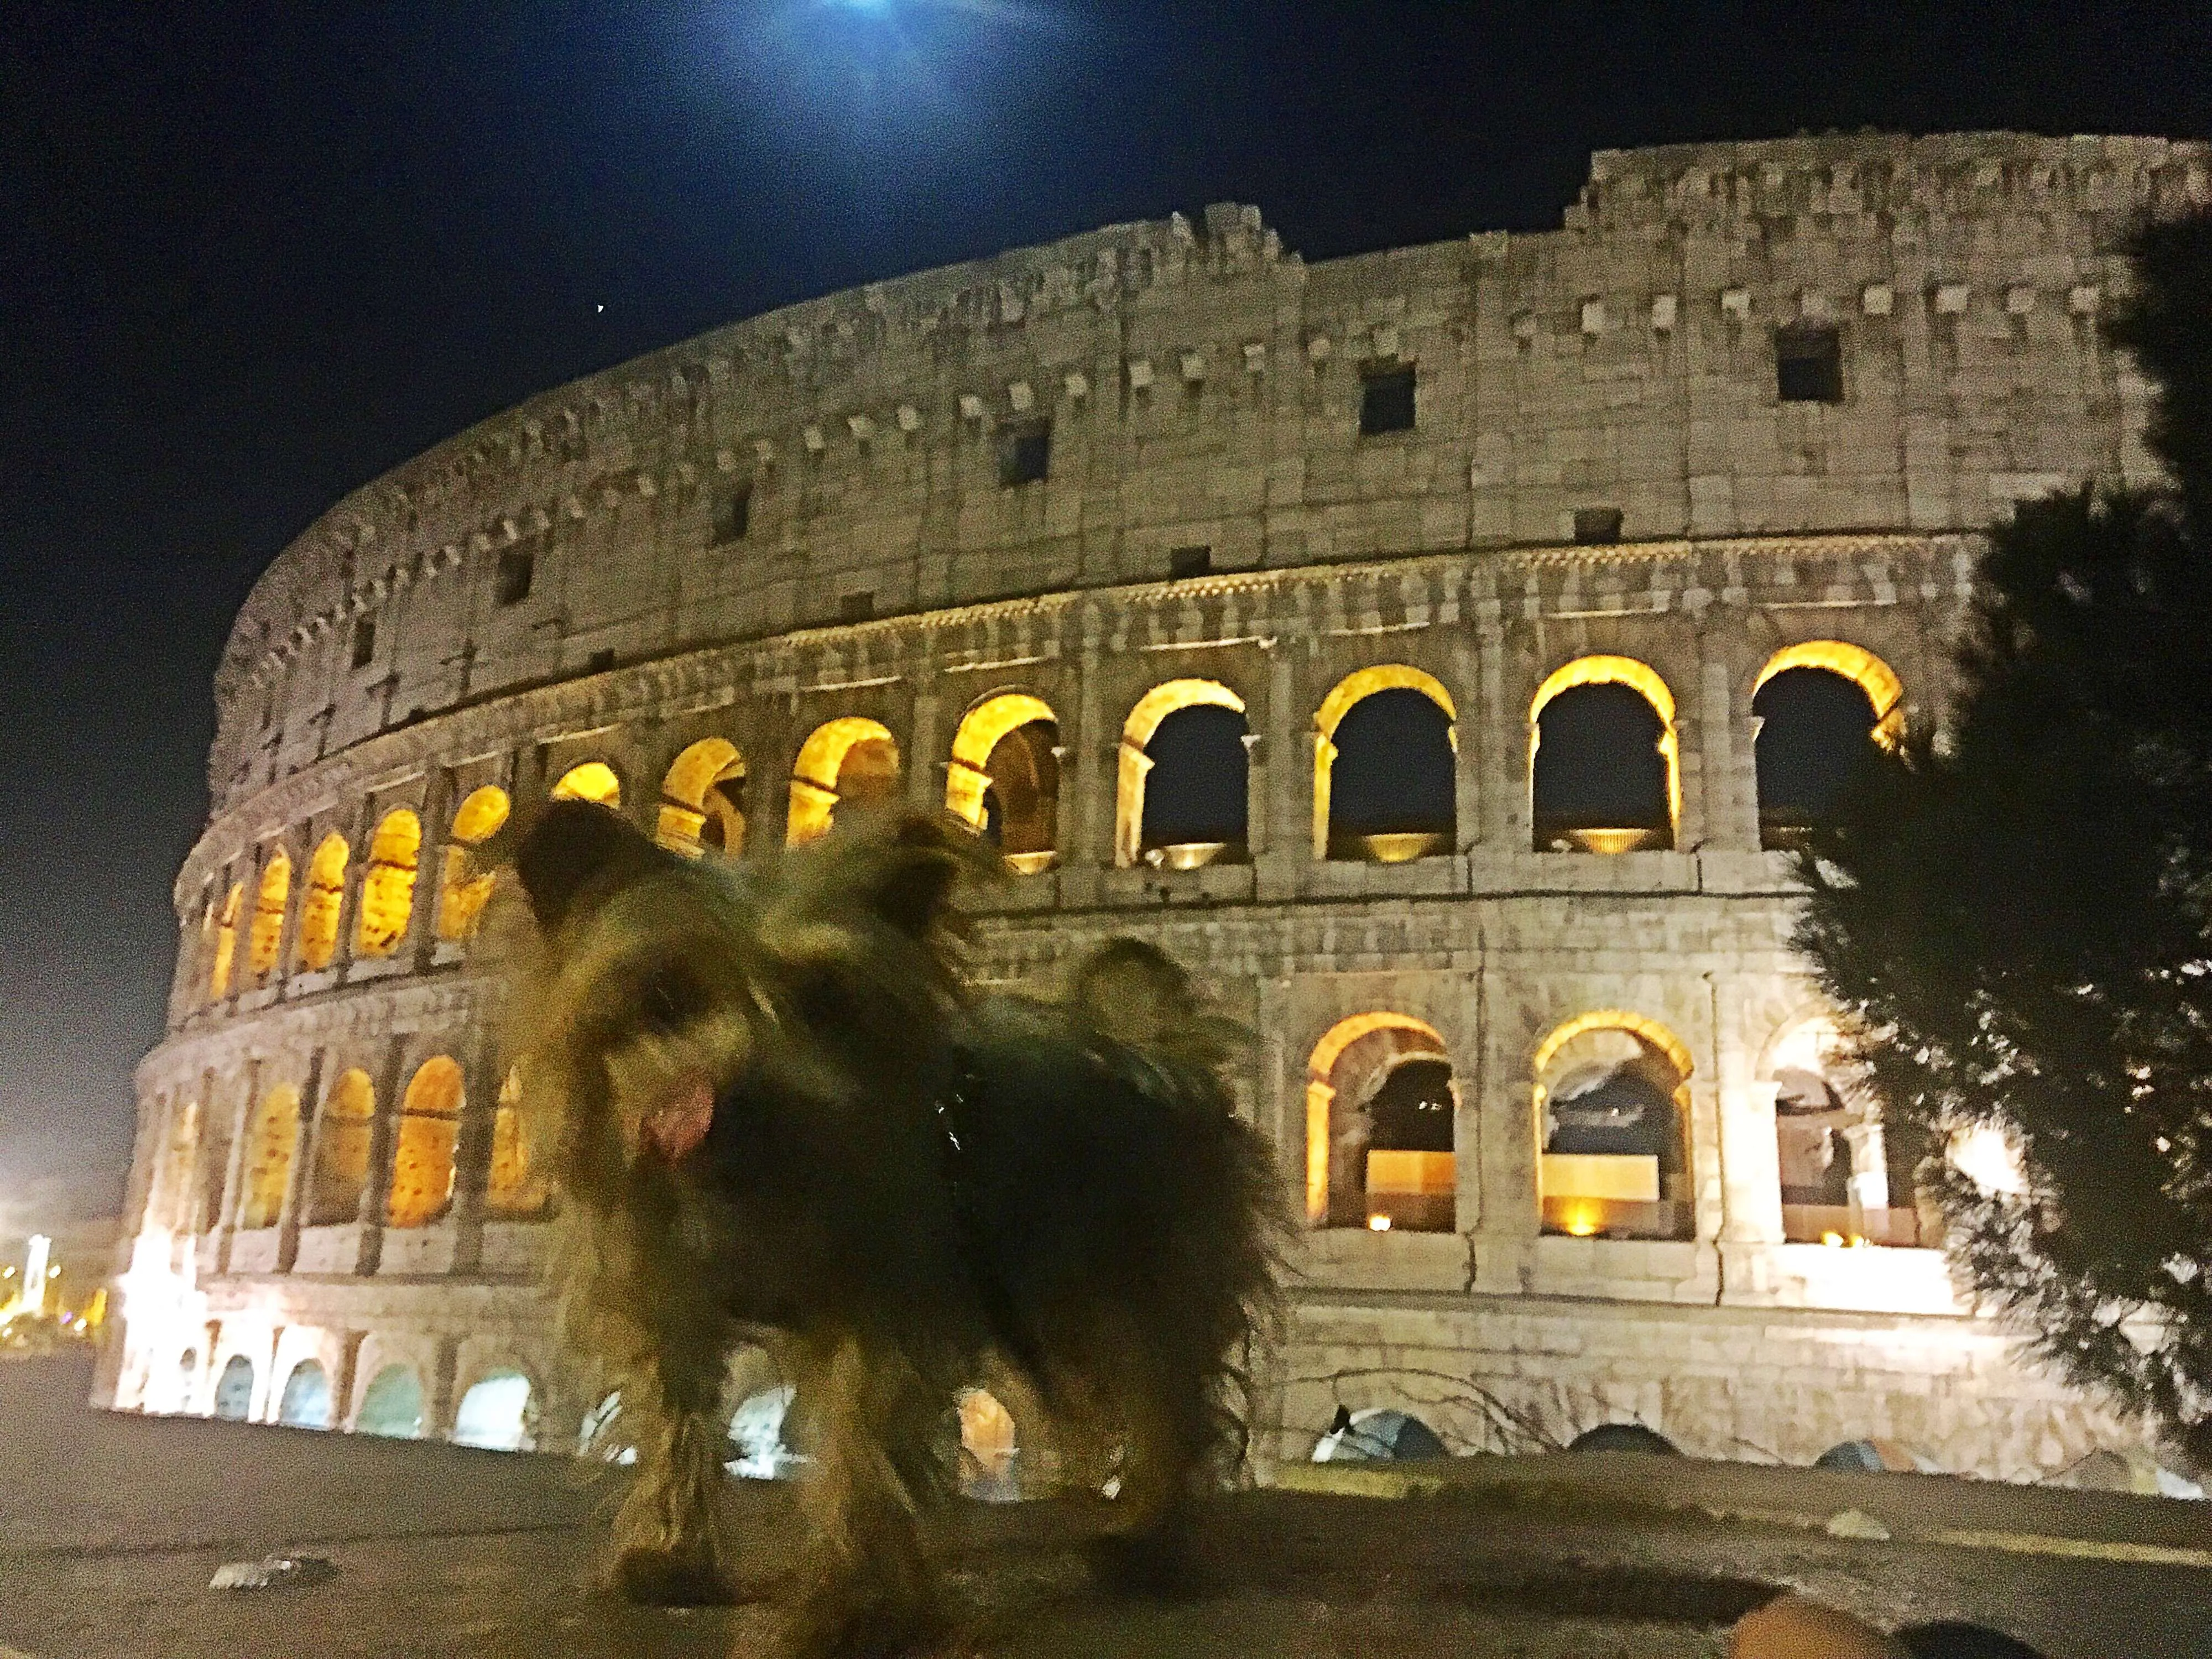 A Yorkie's Food and Health Travel Blog